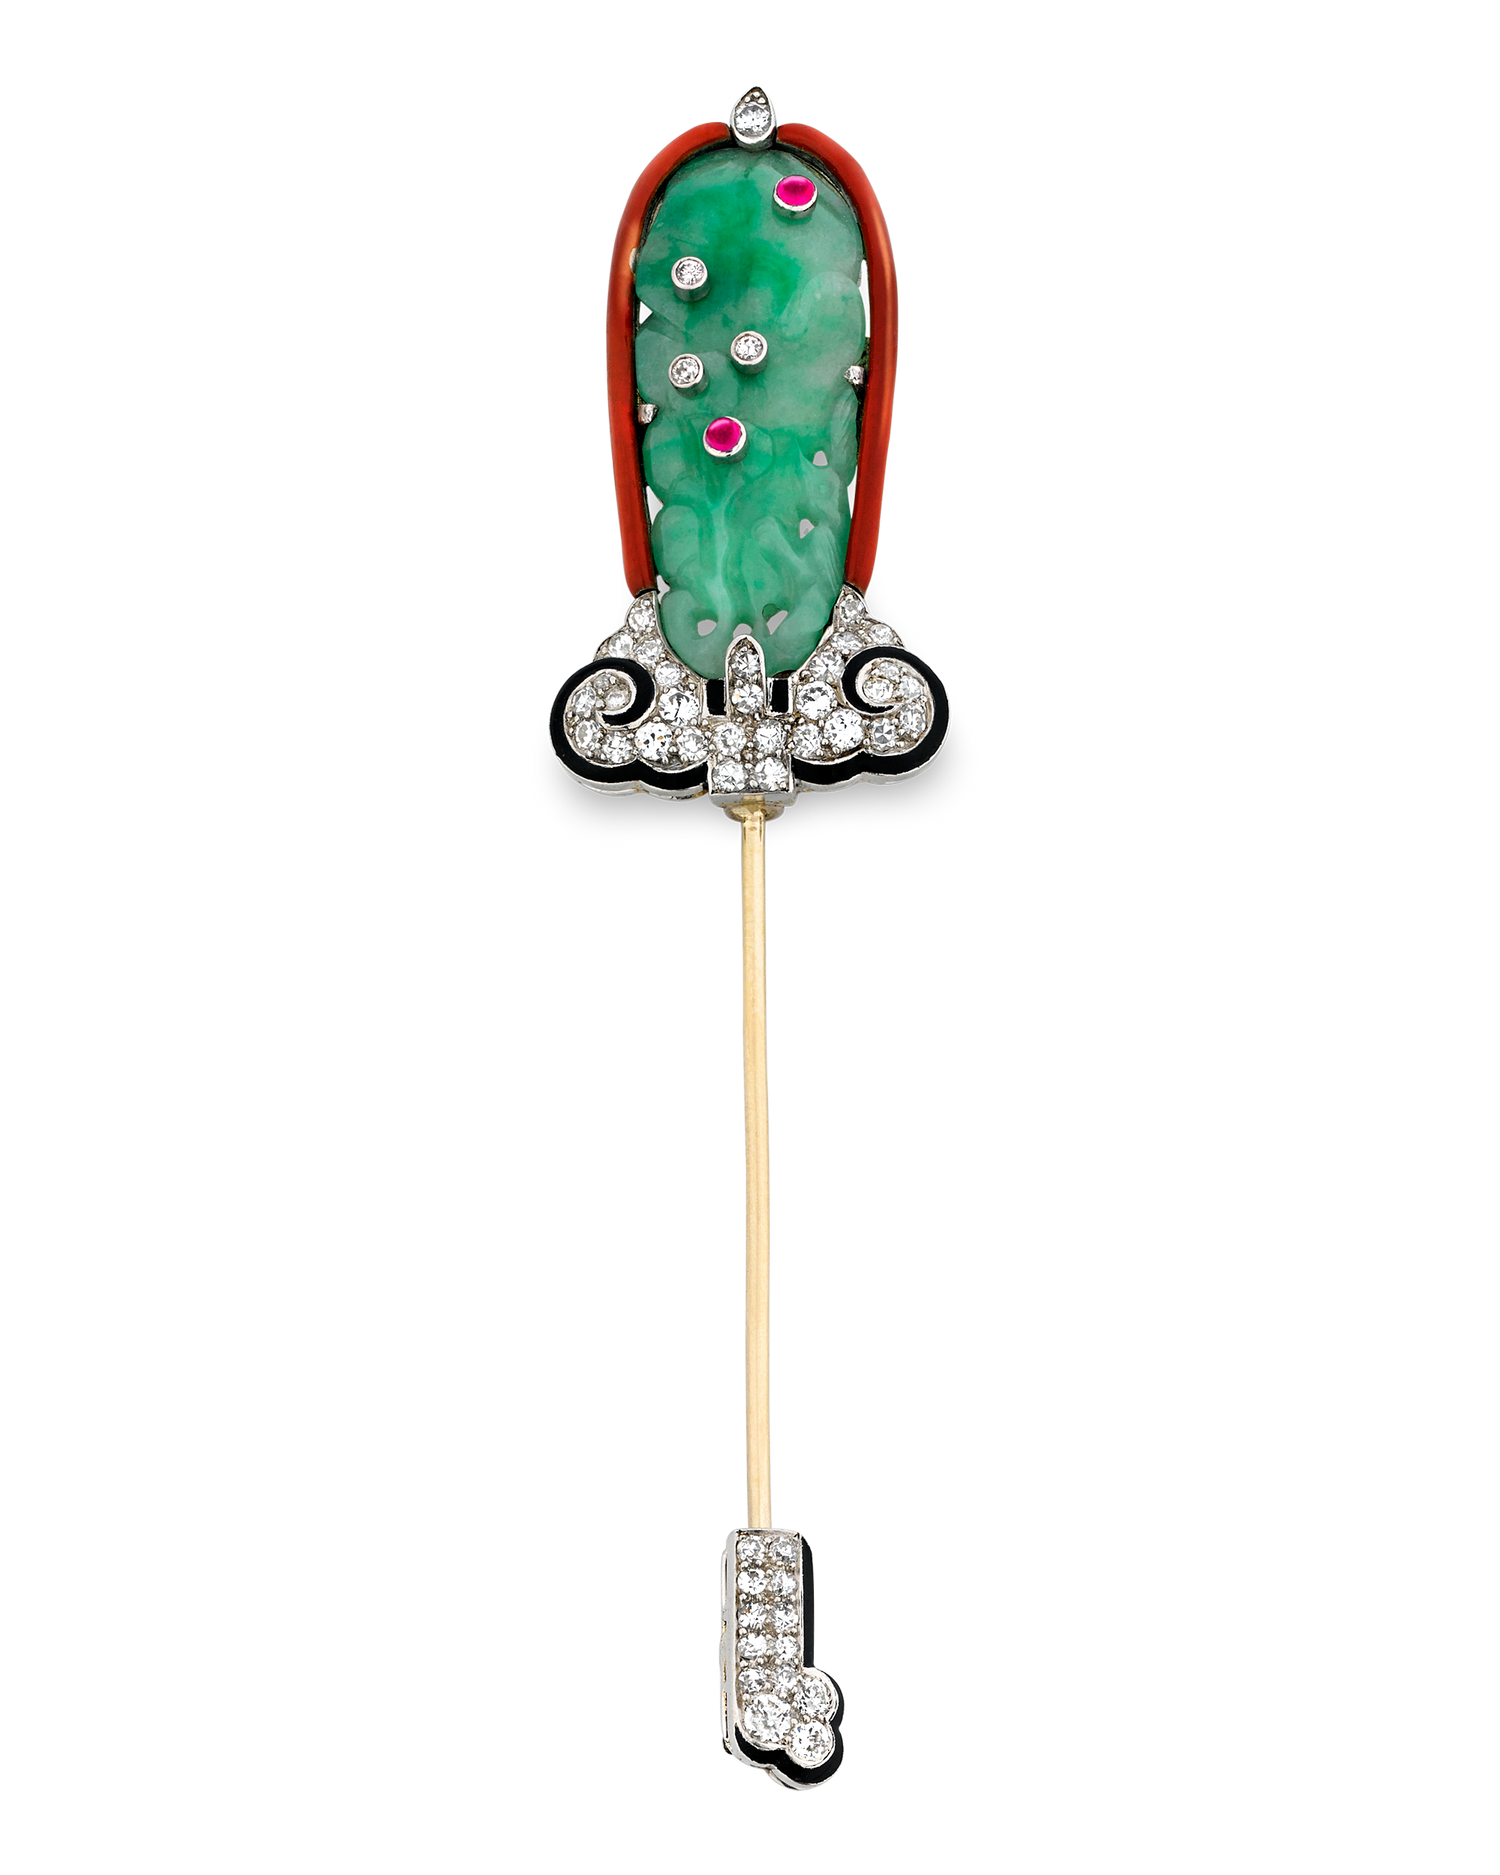 This exquisite jade jabot pin by Cartier epitomizes Art Deco era sophistication